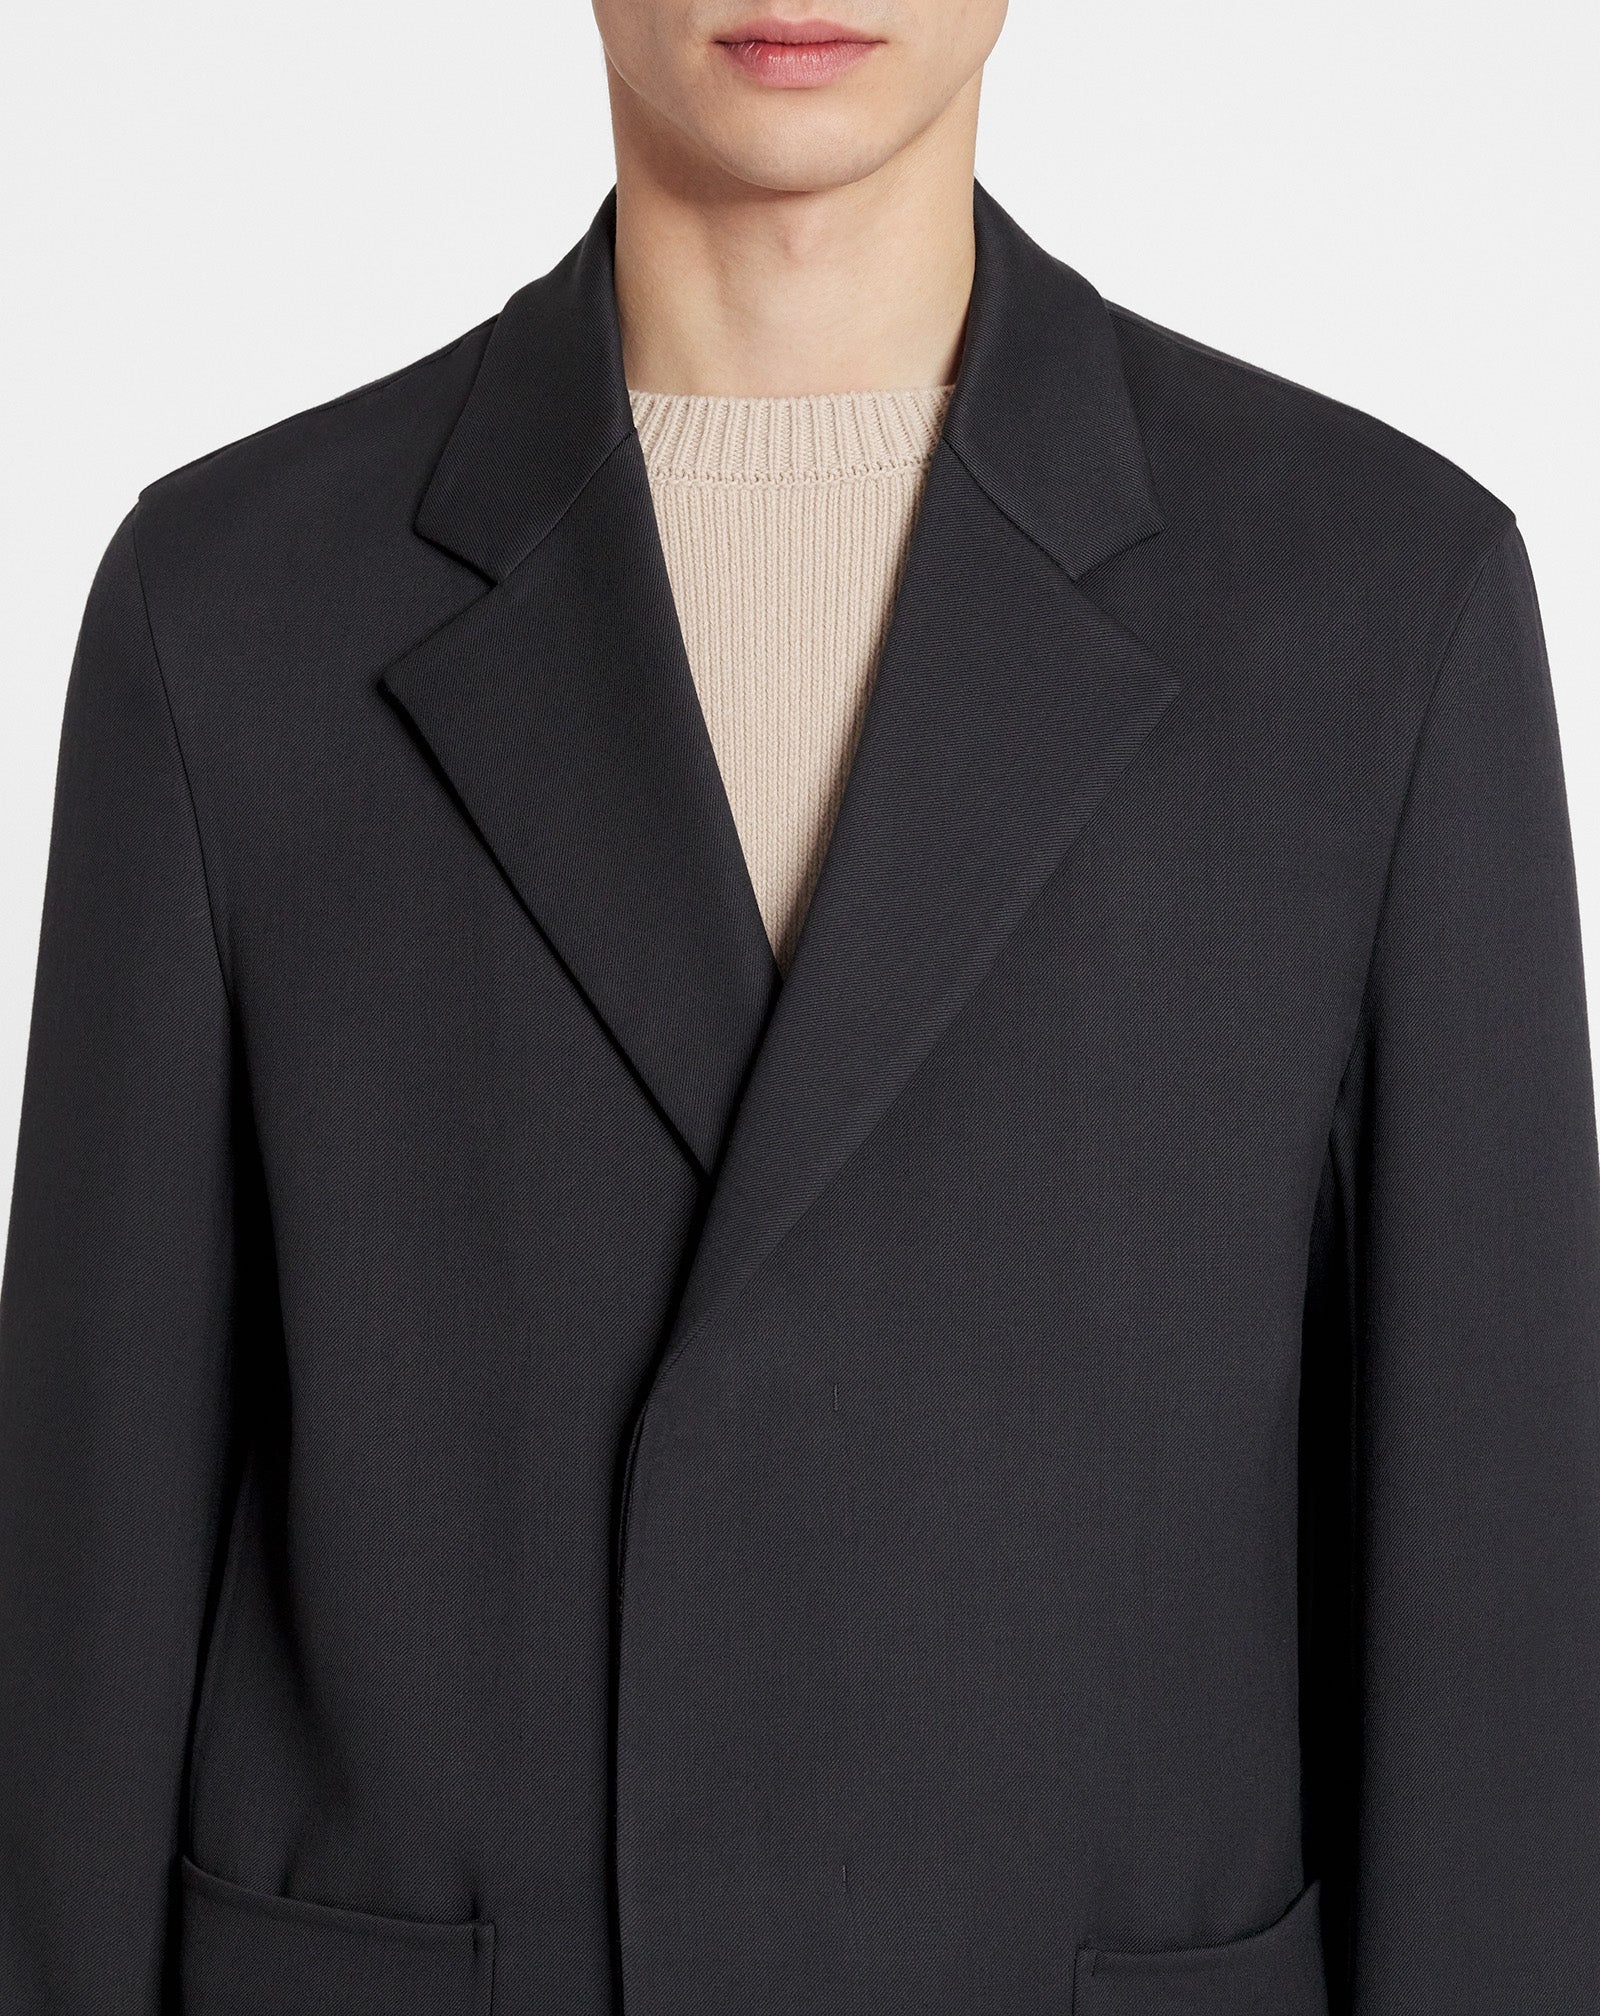 DOUBLE-FACED CASHMERE COAT - 5